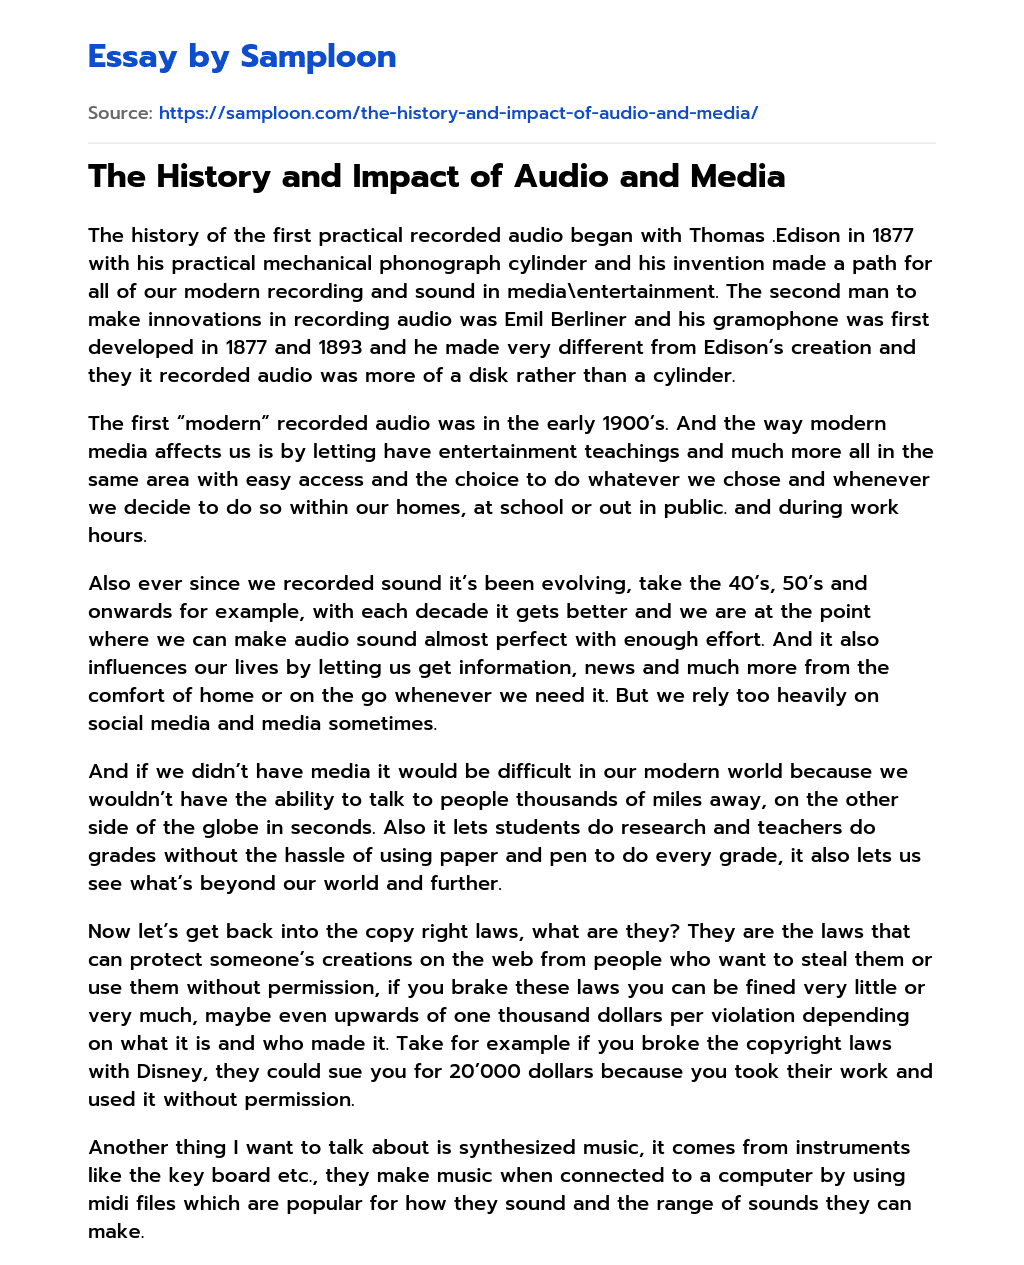 The History and Impact of Audio and Media essay